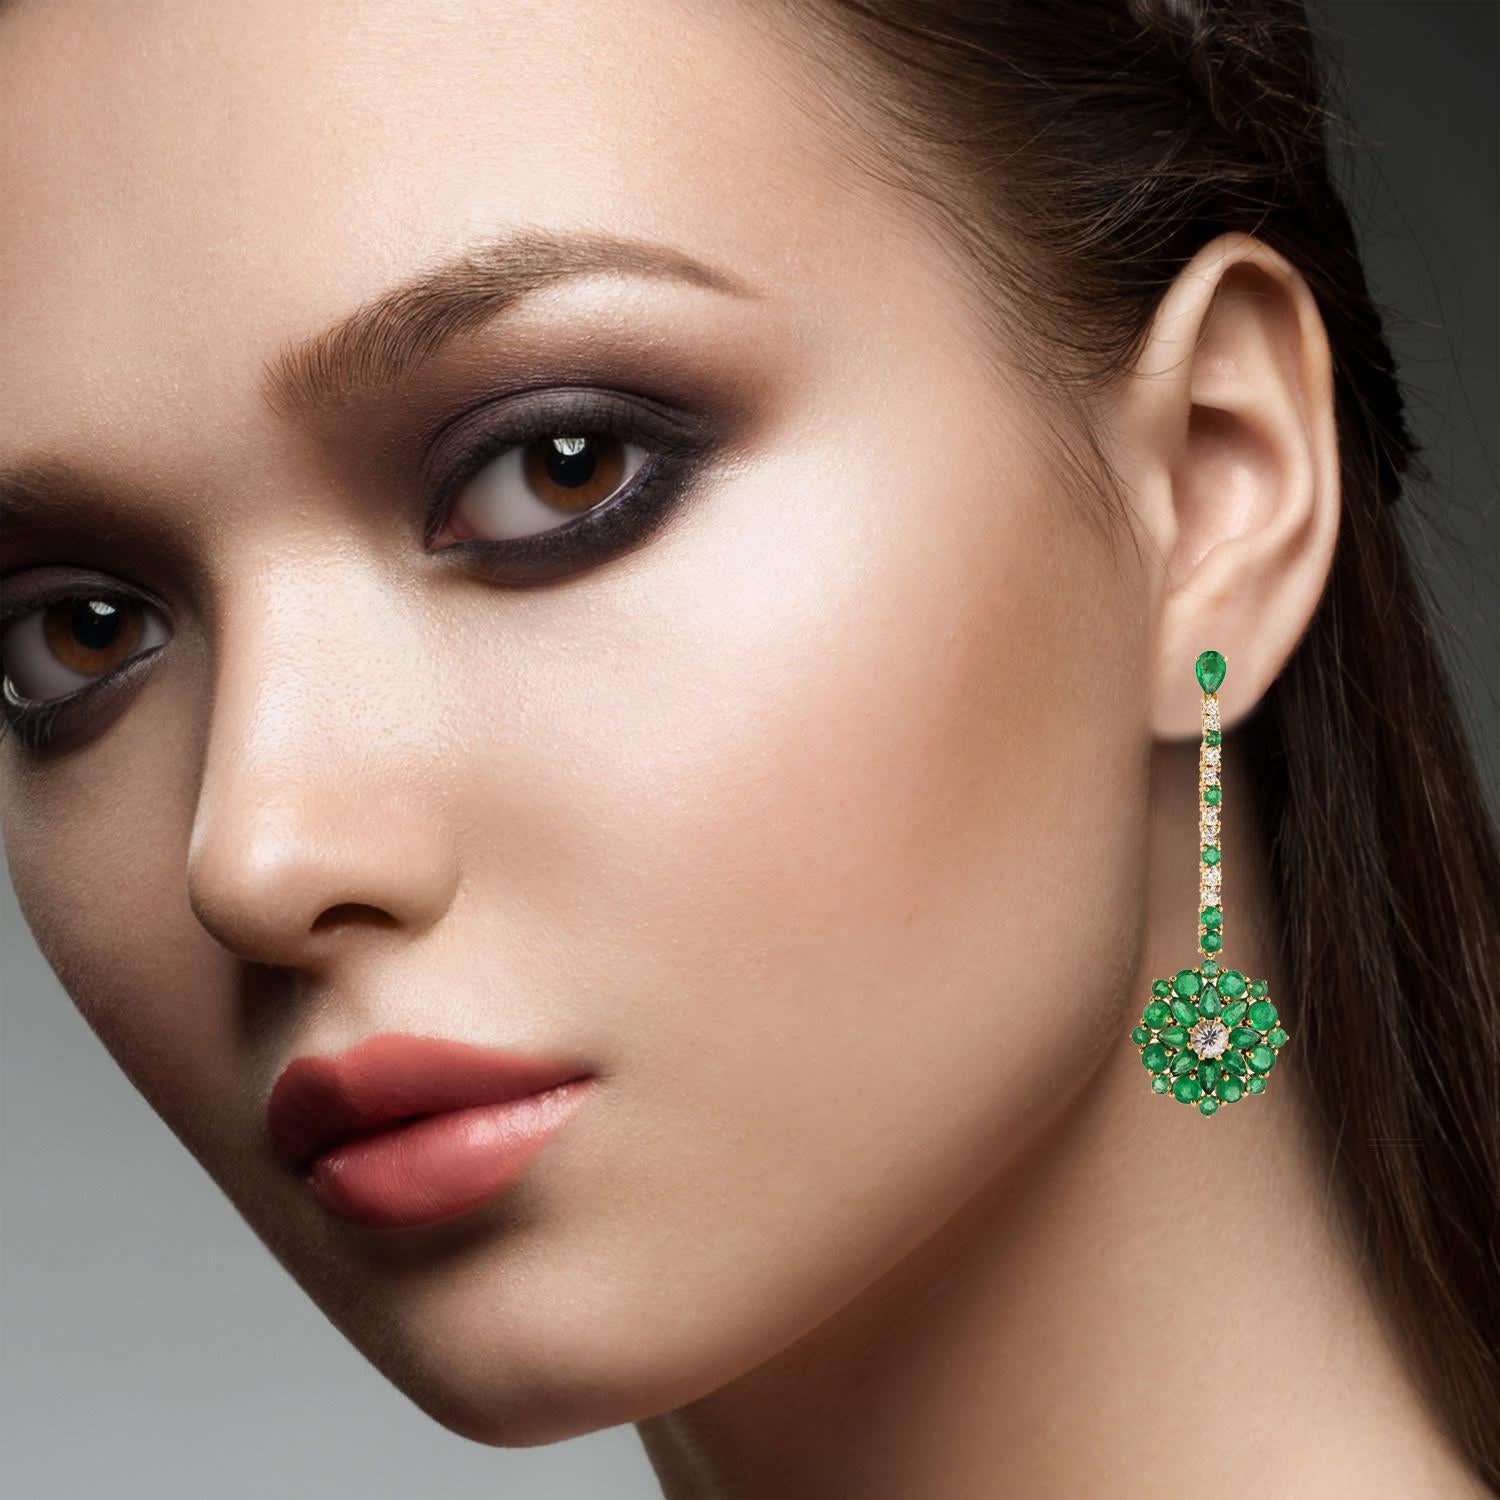 Cast in 14 karat gold, these exquisite earrings are hand set with 10.05 carats emerald and .90 carats of glimmering diamonds. 

FOLLOW MEGHNA JEWELS storefront to view the latest collection & exclusive pieces. Meghna Jewels is proudly rated as a Top